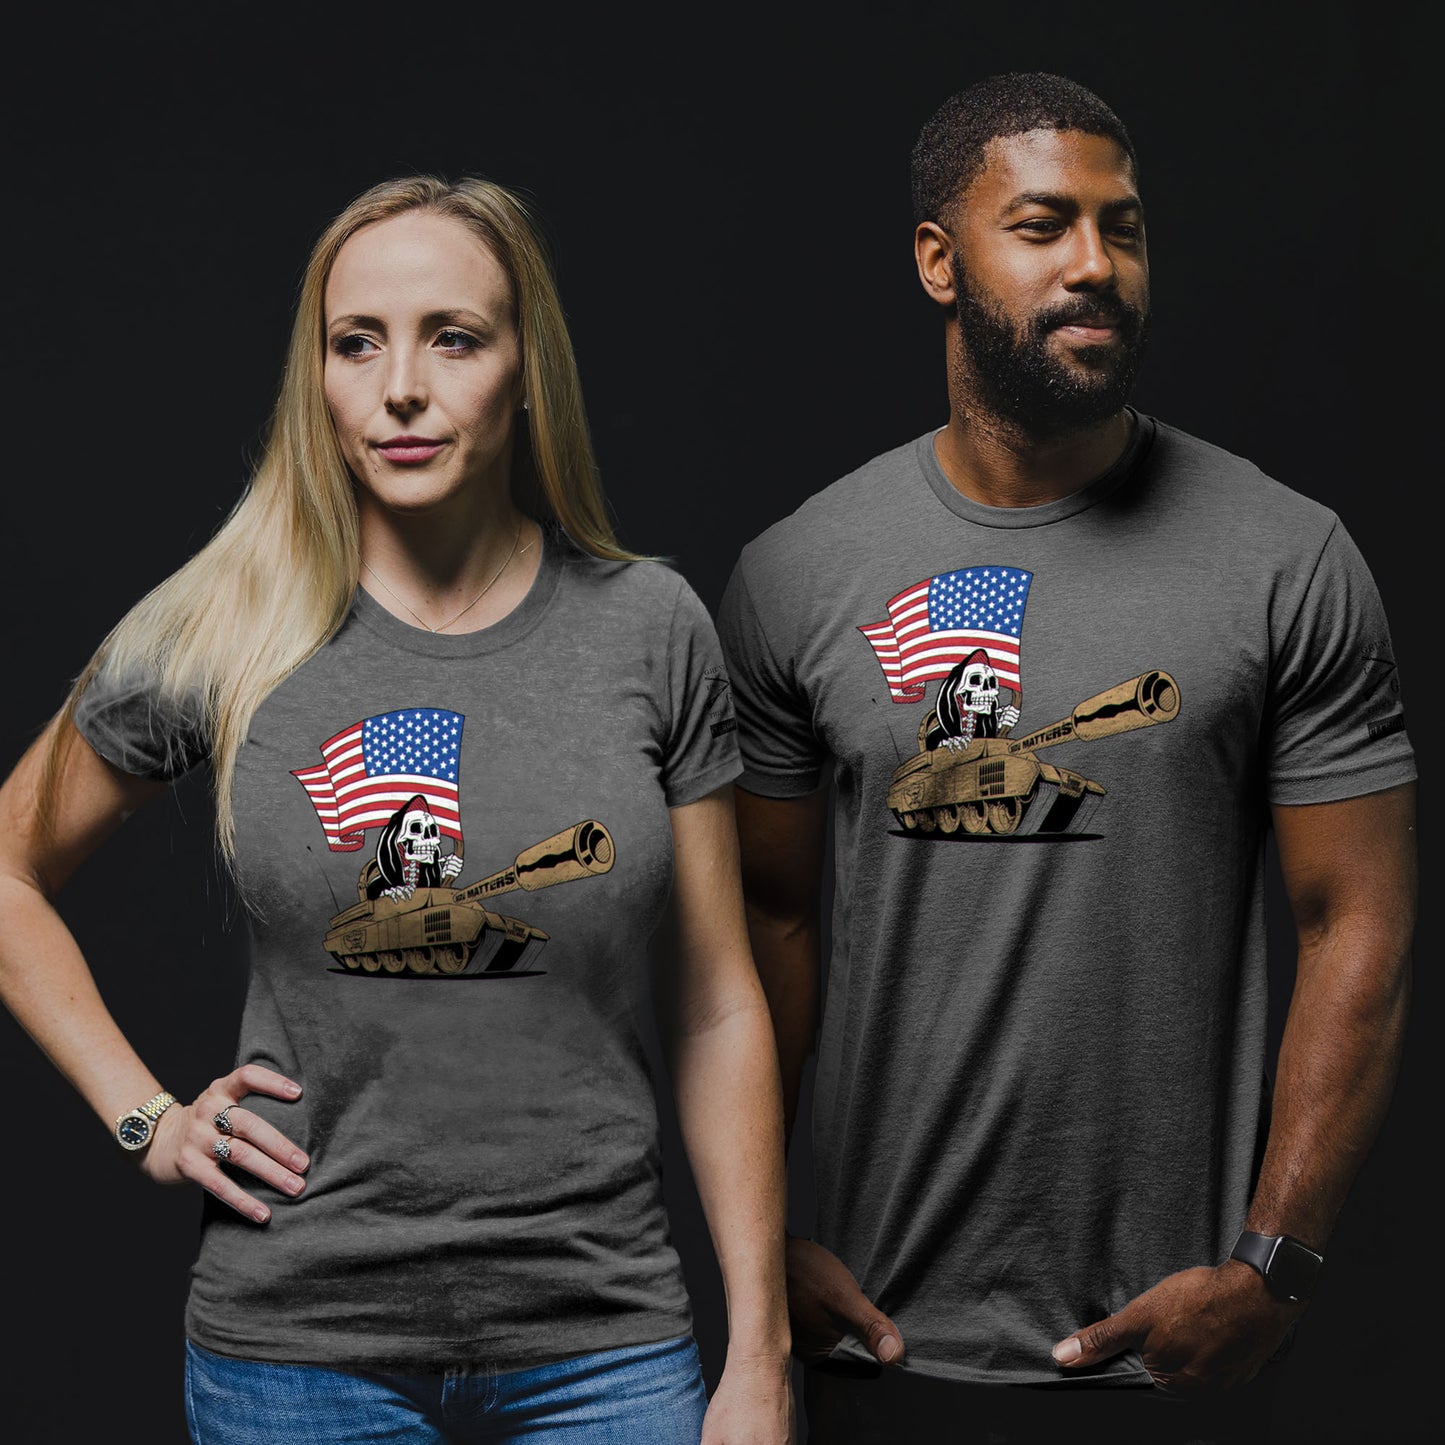 Patriotic Clothing for Women  | Shirt of the Month Club